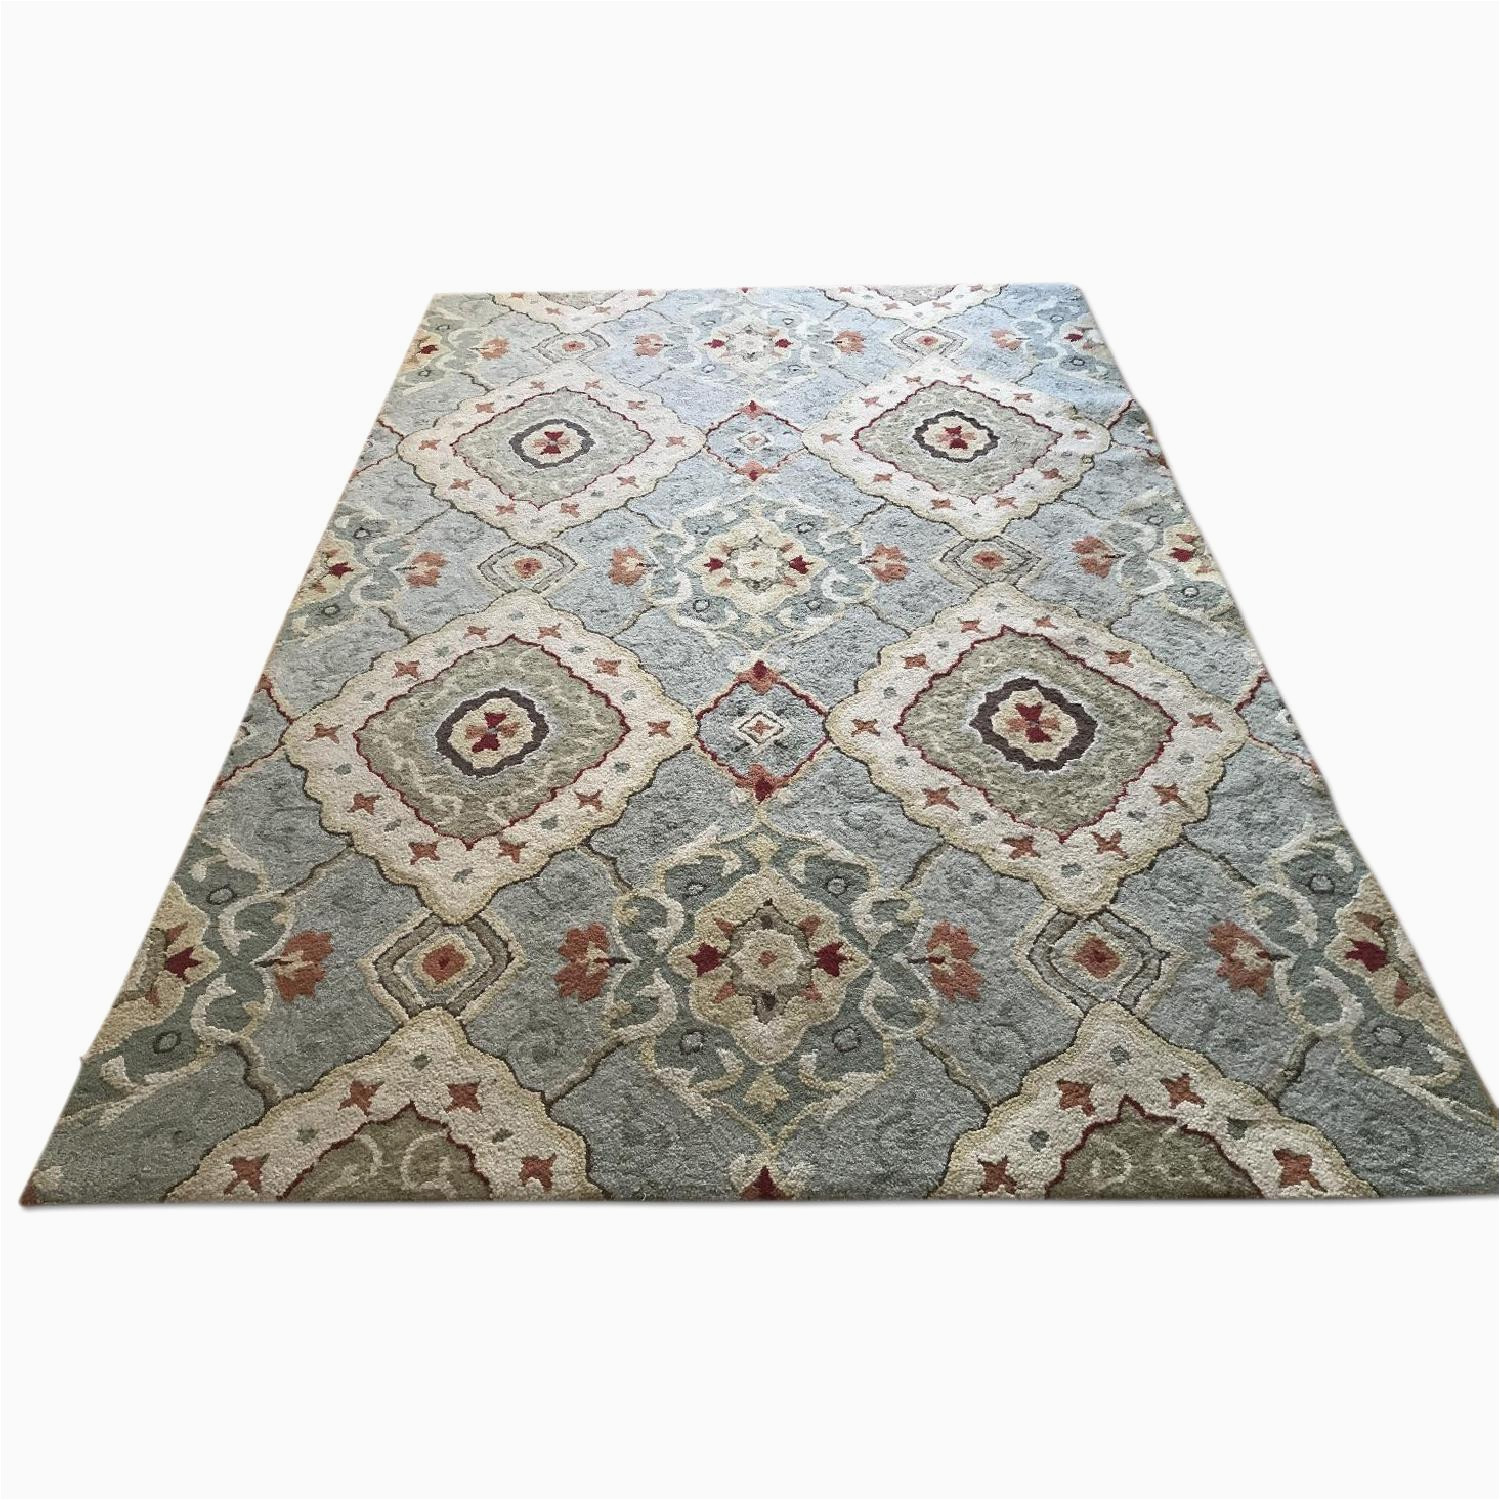 Pier One area Rugs 9×12 Pier 1 Imports Tapis area Rug